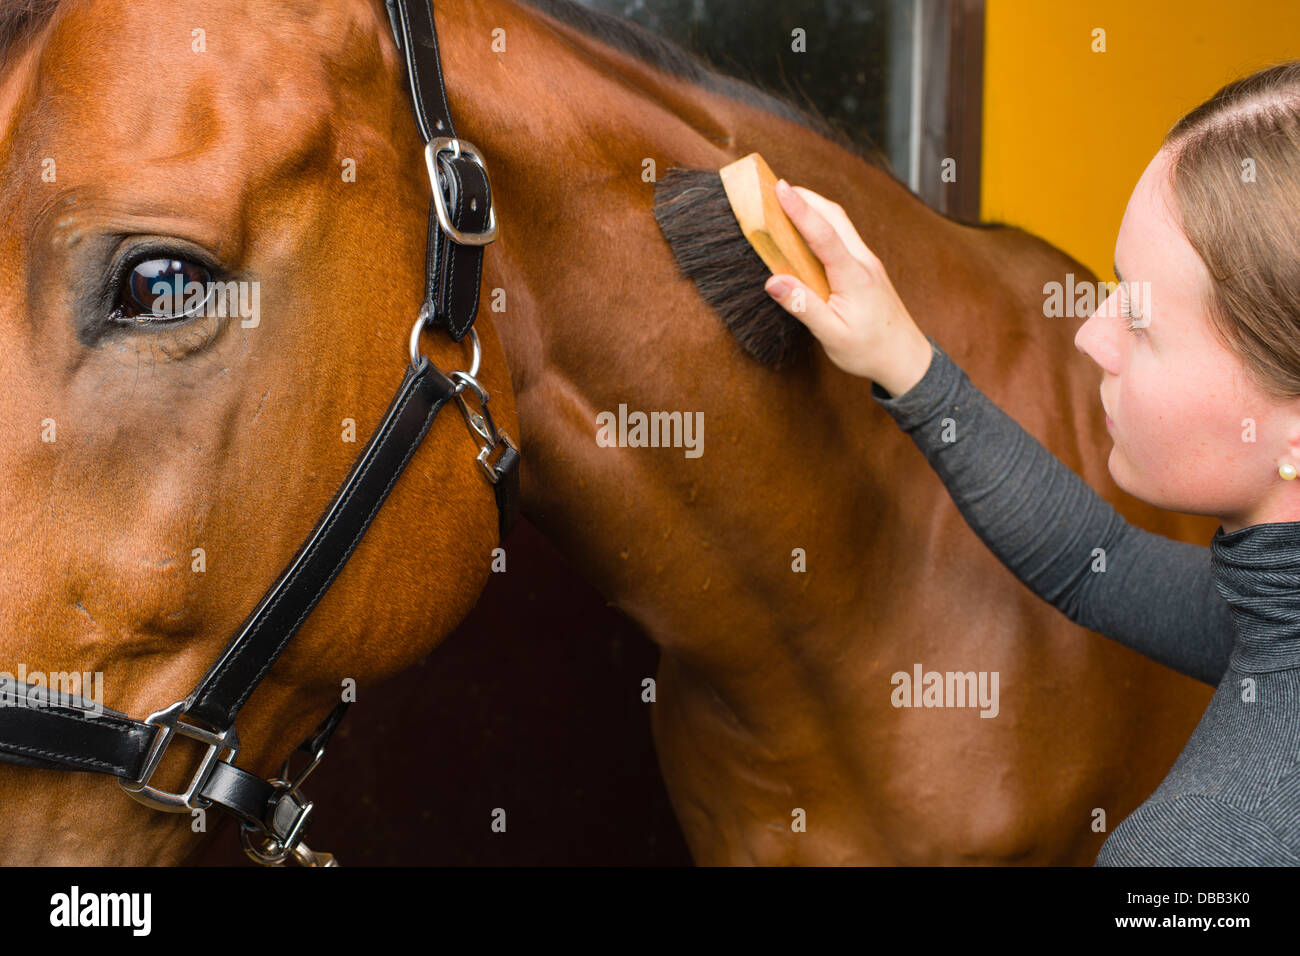 Grooming horse Stock Photo